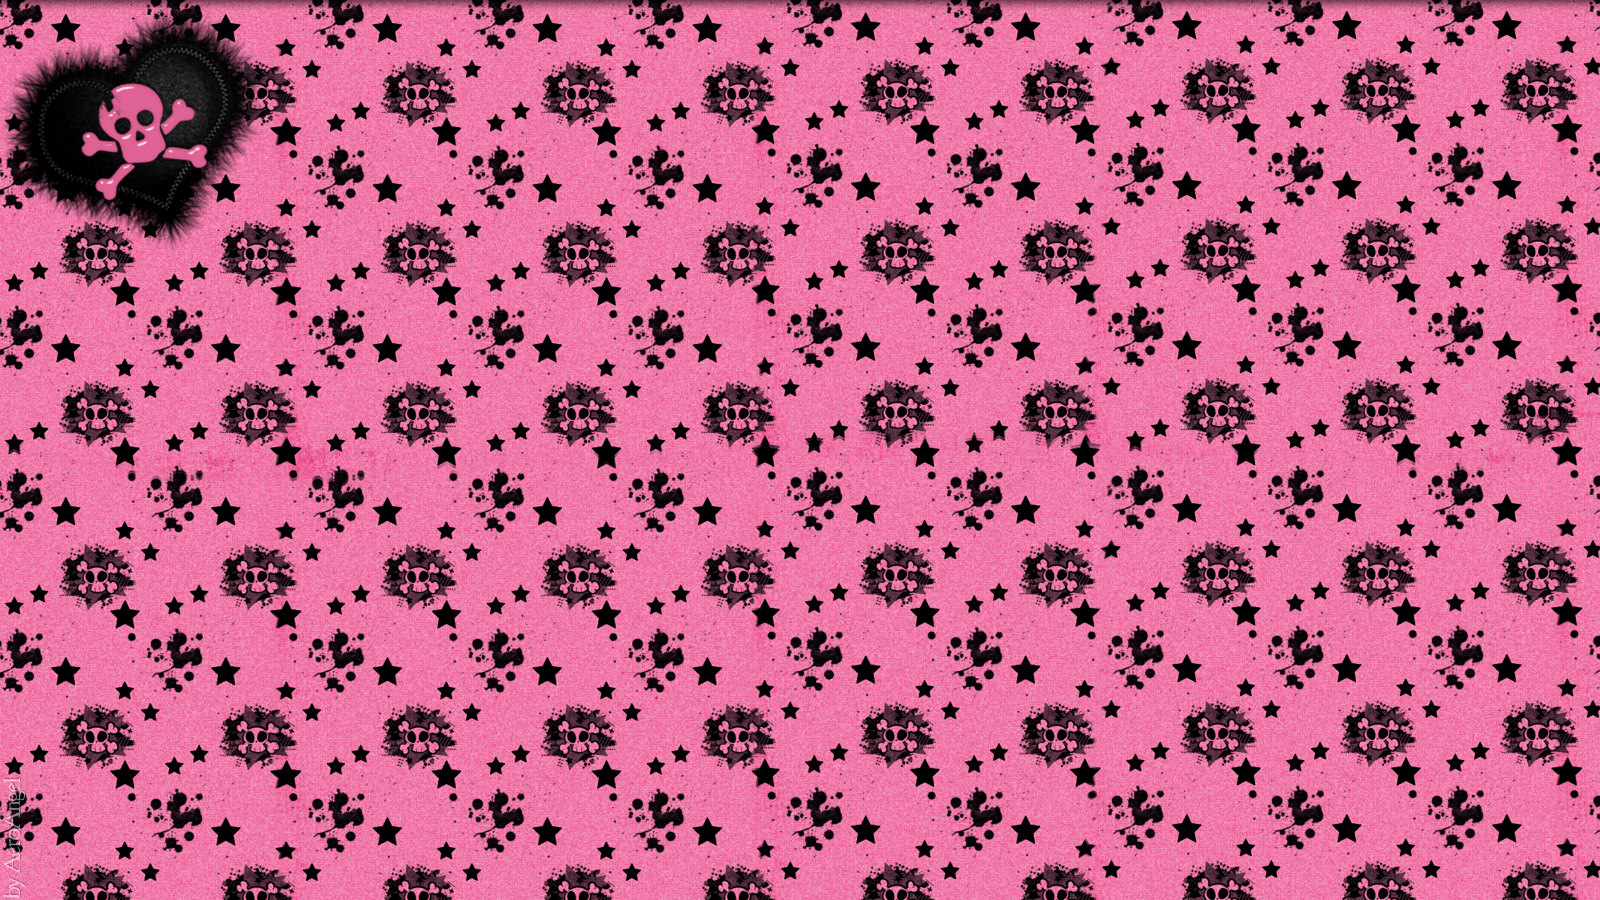 Girly Skull Backgrounds Download the background image